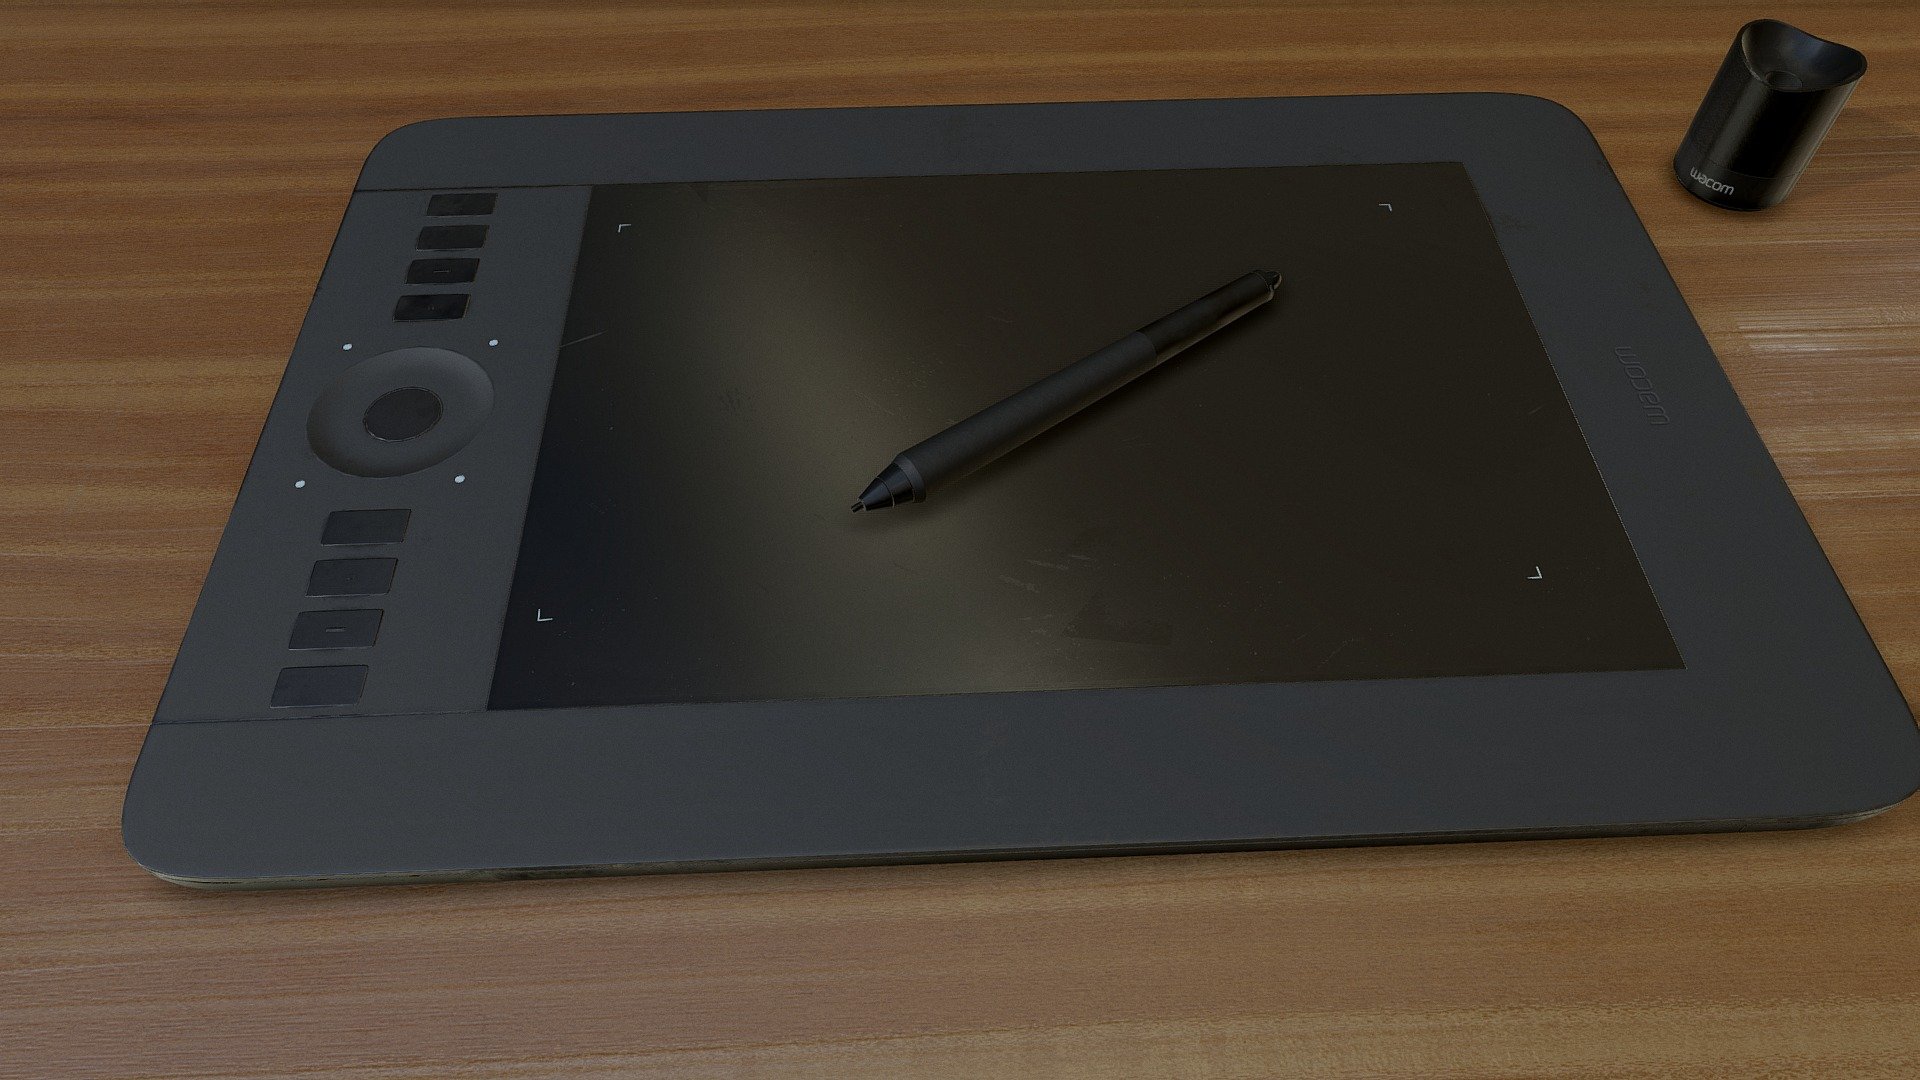 Continuing my series of modeling things in my office and trying my best to get the best representation in the 3D space.

This time around I went with modeling my Wacom tablet. One thing that I've gotten out of this series is how much more details are in the actual items I model, that I would've never noticed by just looking at it.

Great prop model to fill up or be in the background of scenes 

Link- https://www.artstation.com/artwork/YeEqnX - Wacom Intuos Pro - Buy Royalty Free 3D model by pozo3d 3d model